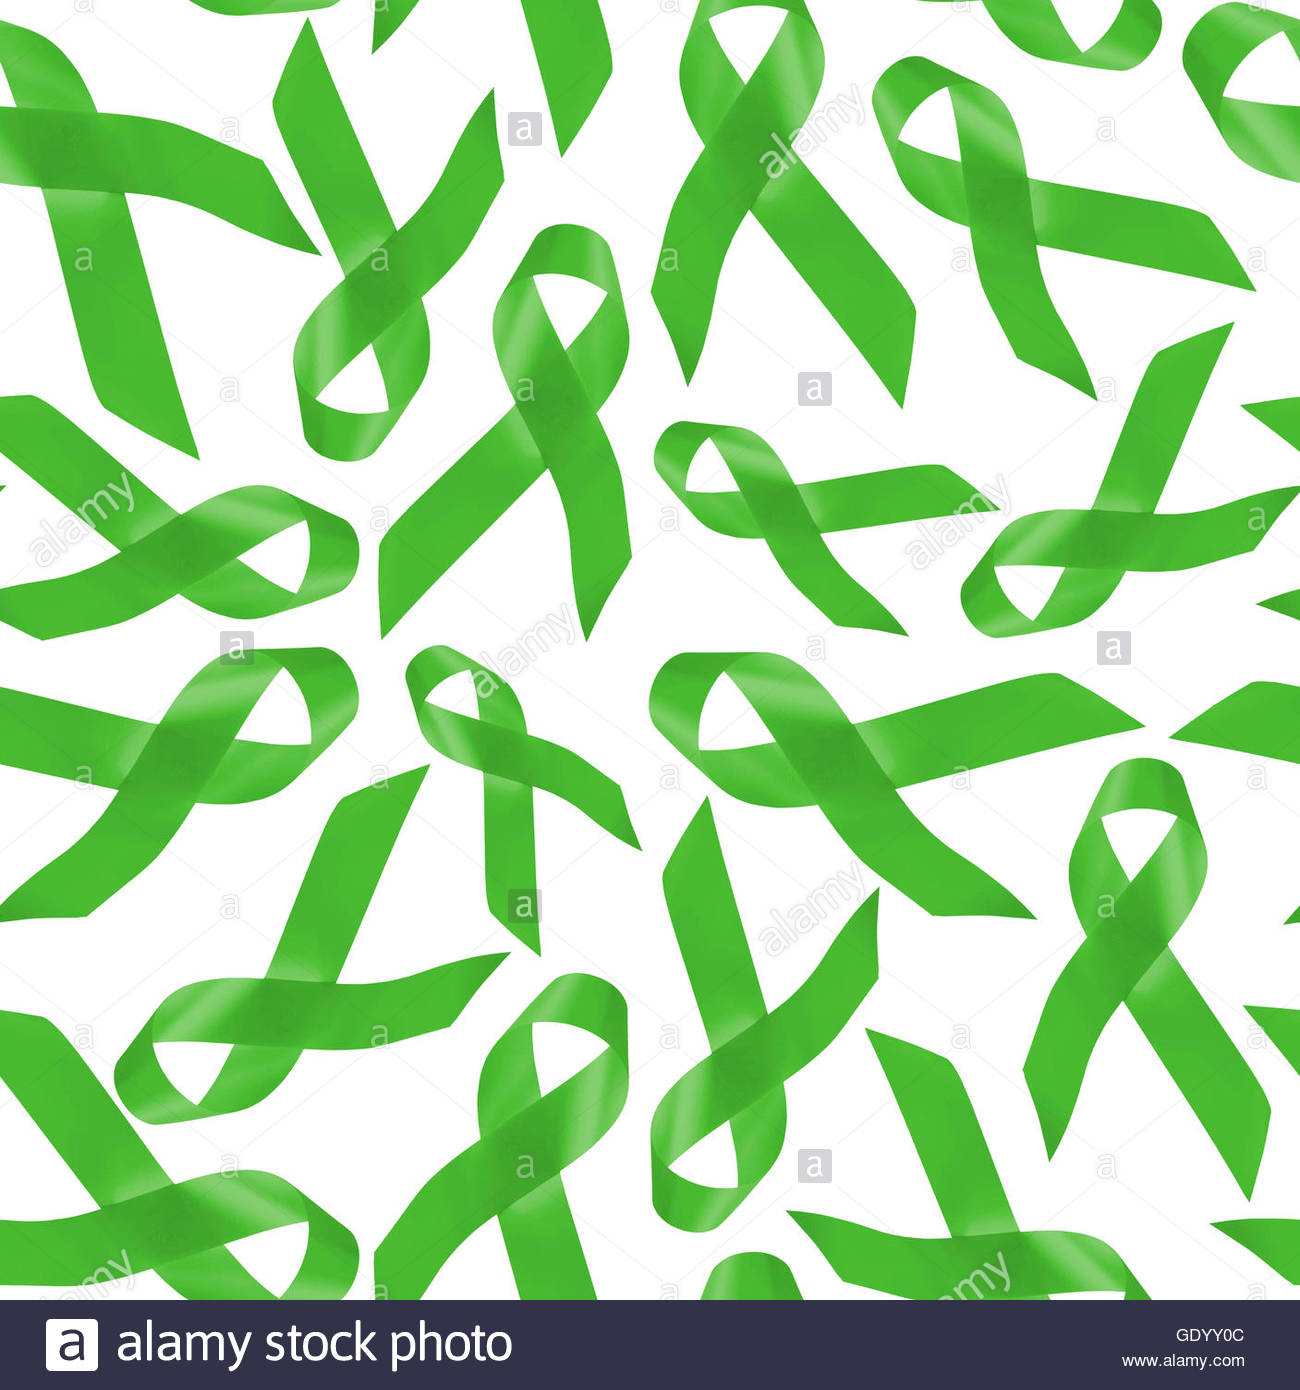 Lymphoma Cancer Awareness Background Seamless Pattern Made Of